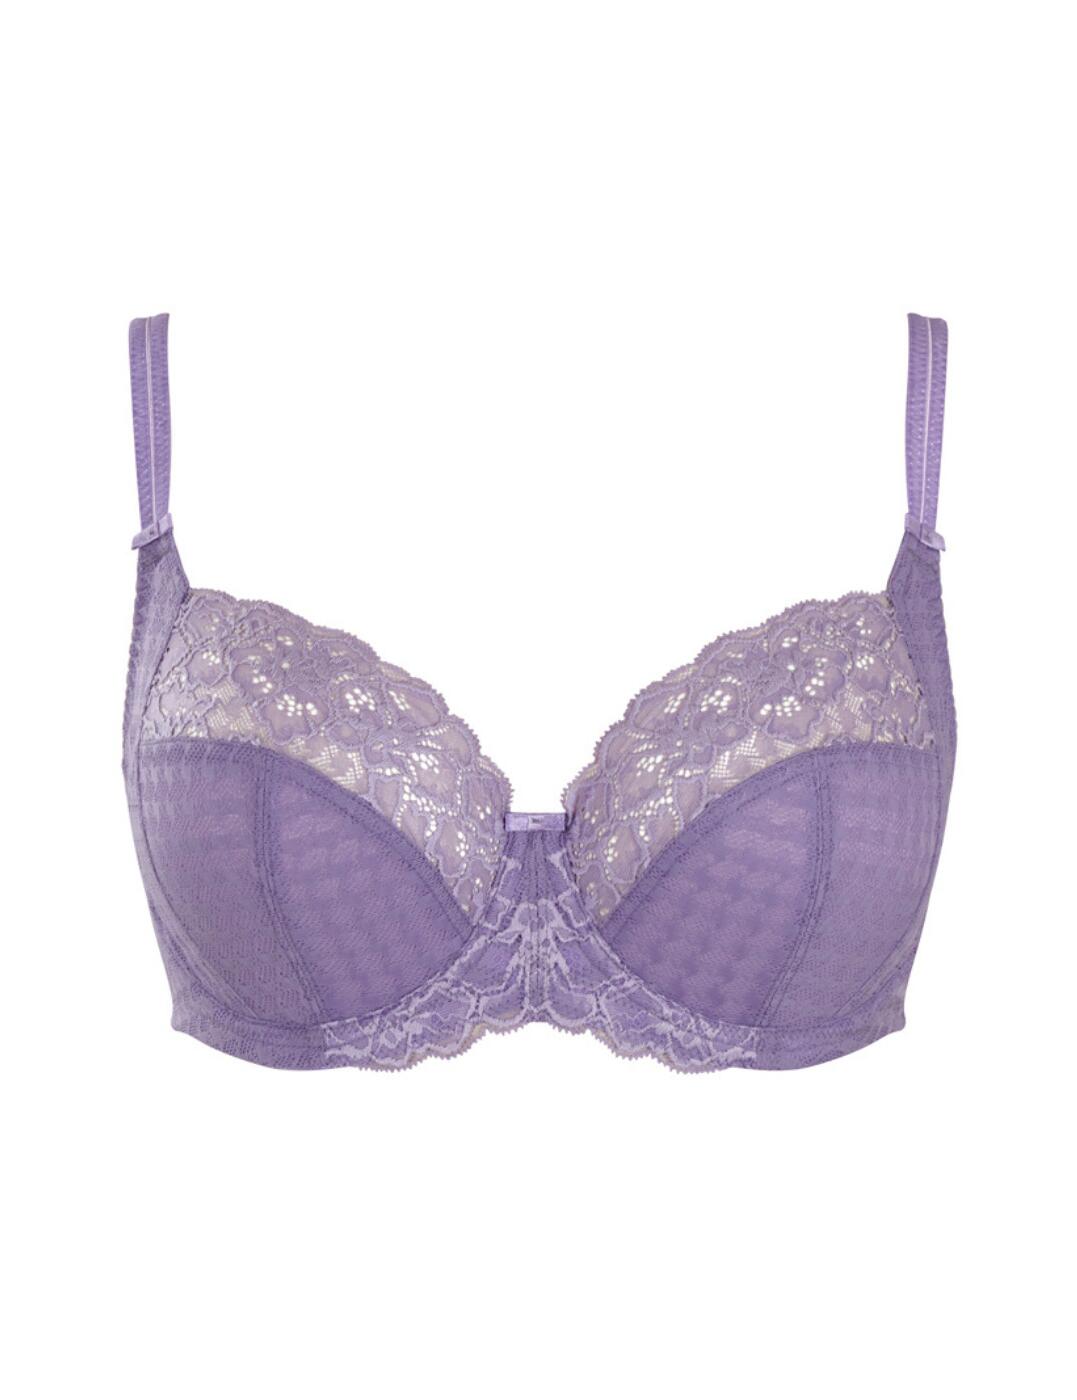 Buy Panache Envy Full Cup Bra from the Next UK online shop